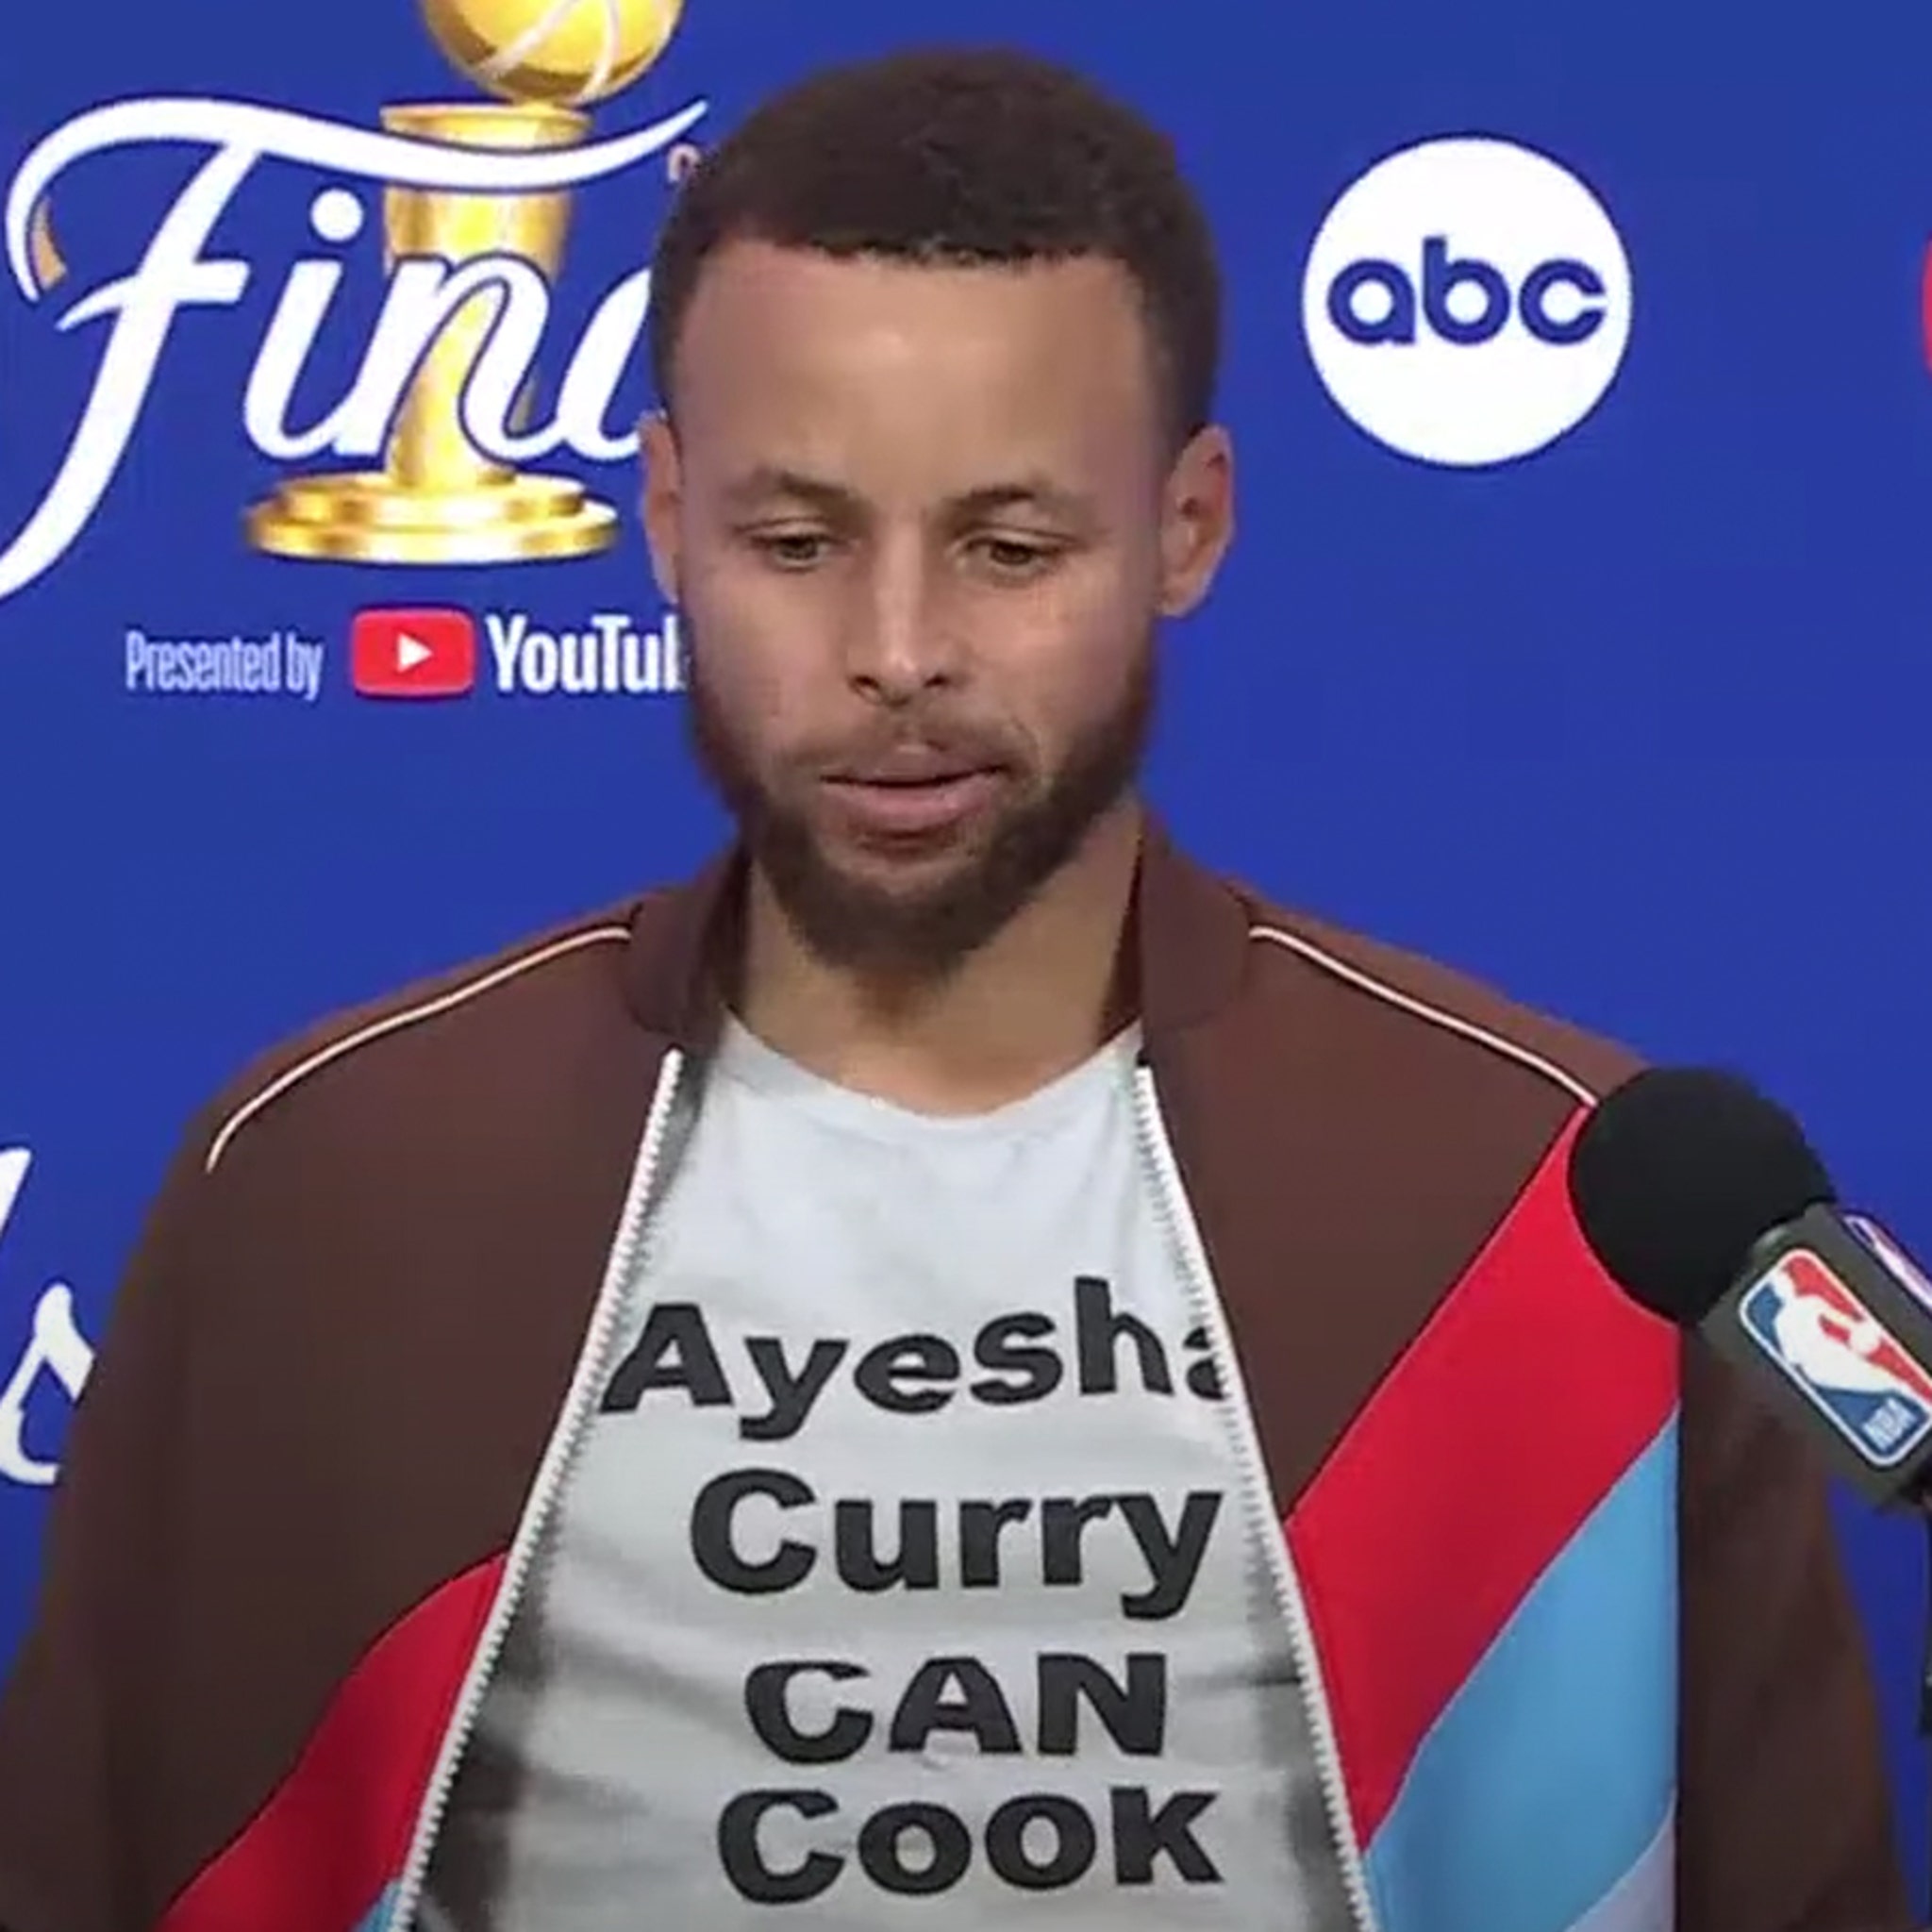 Fans troll Steph Curry over his new short hair look: “Looks like